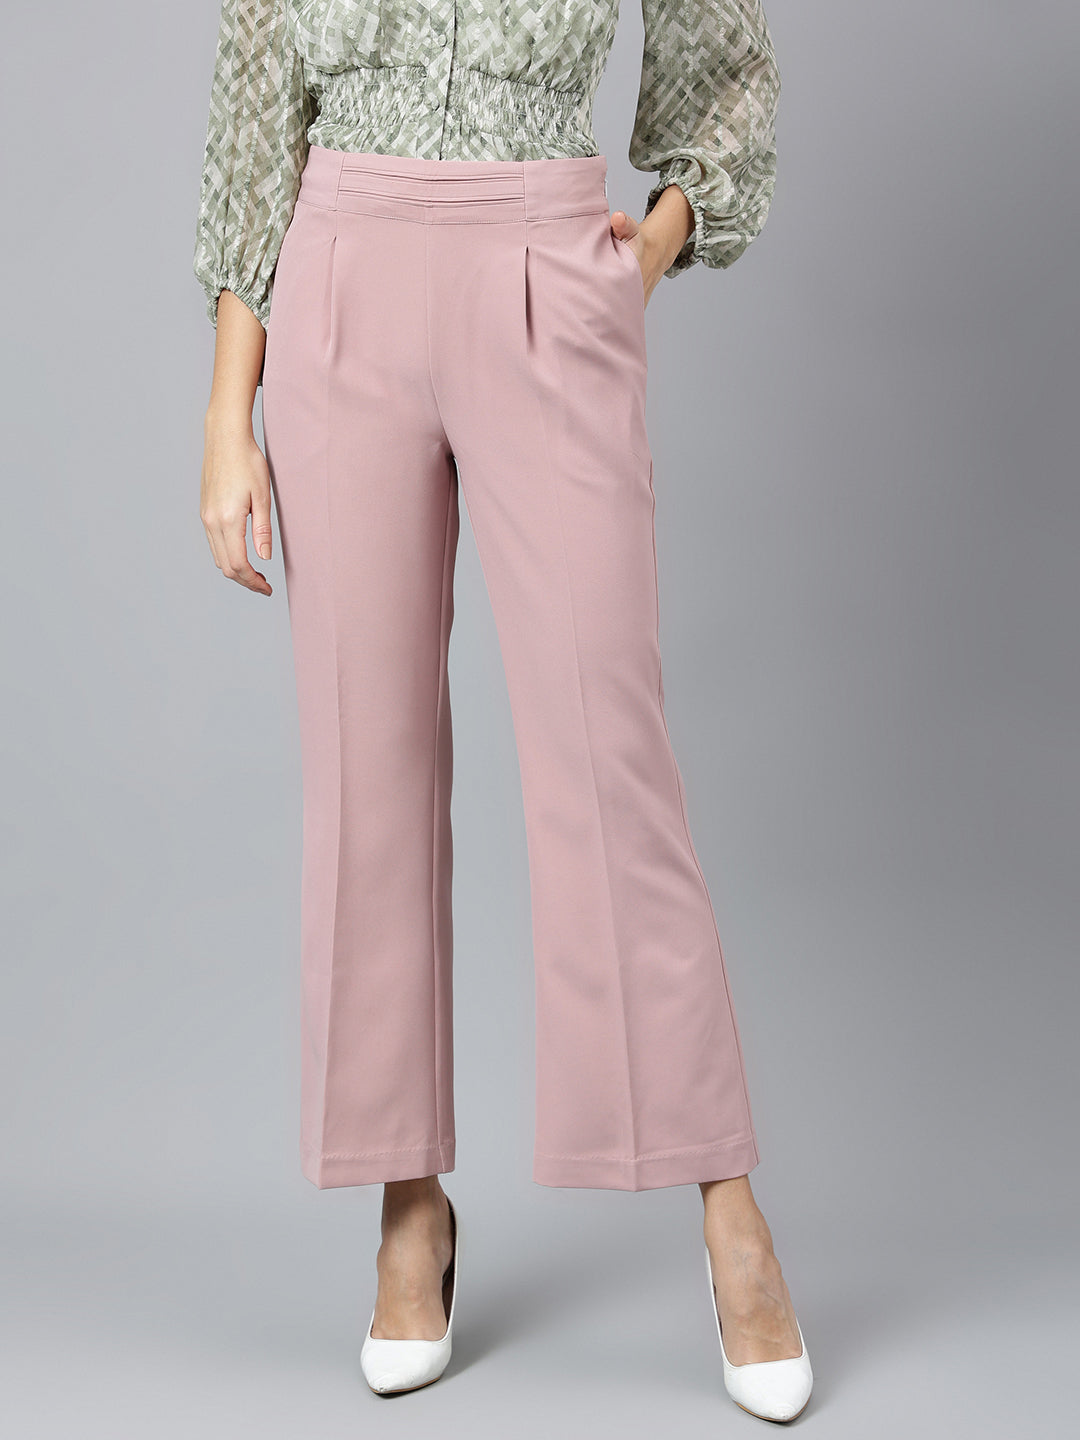 Pink Solid Casual Pant